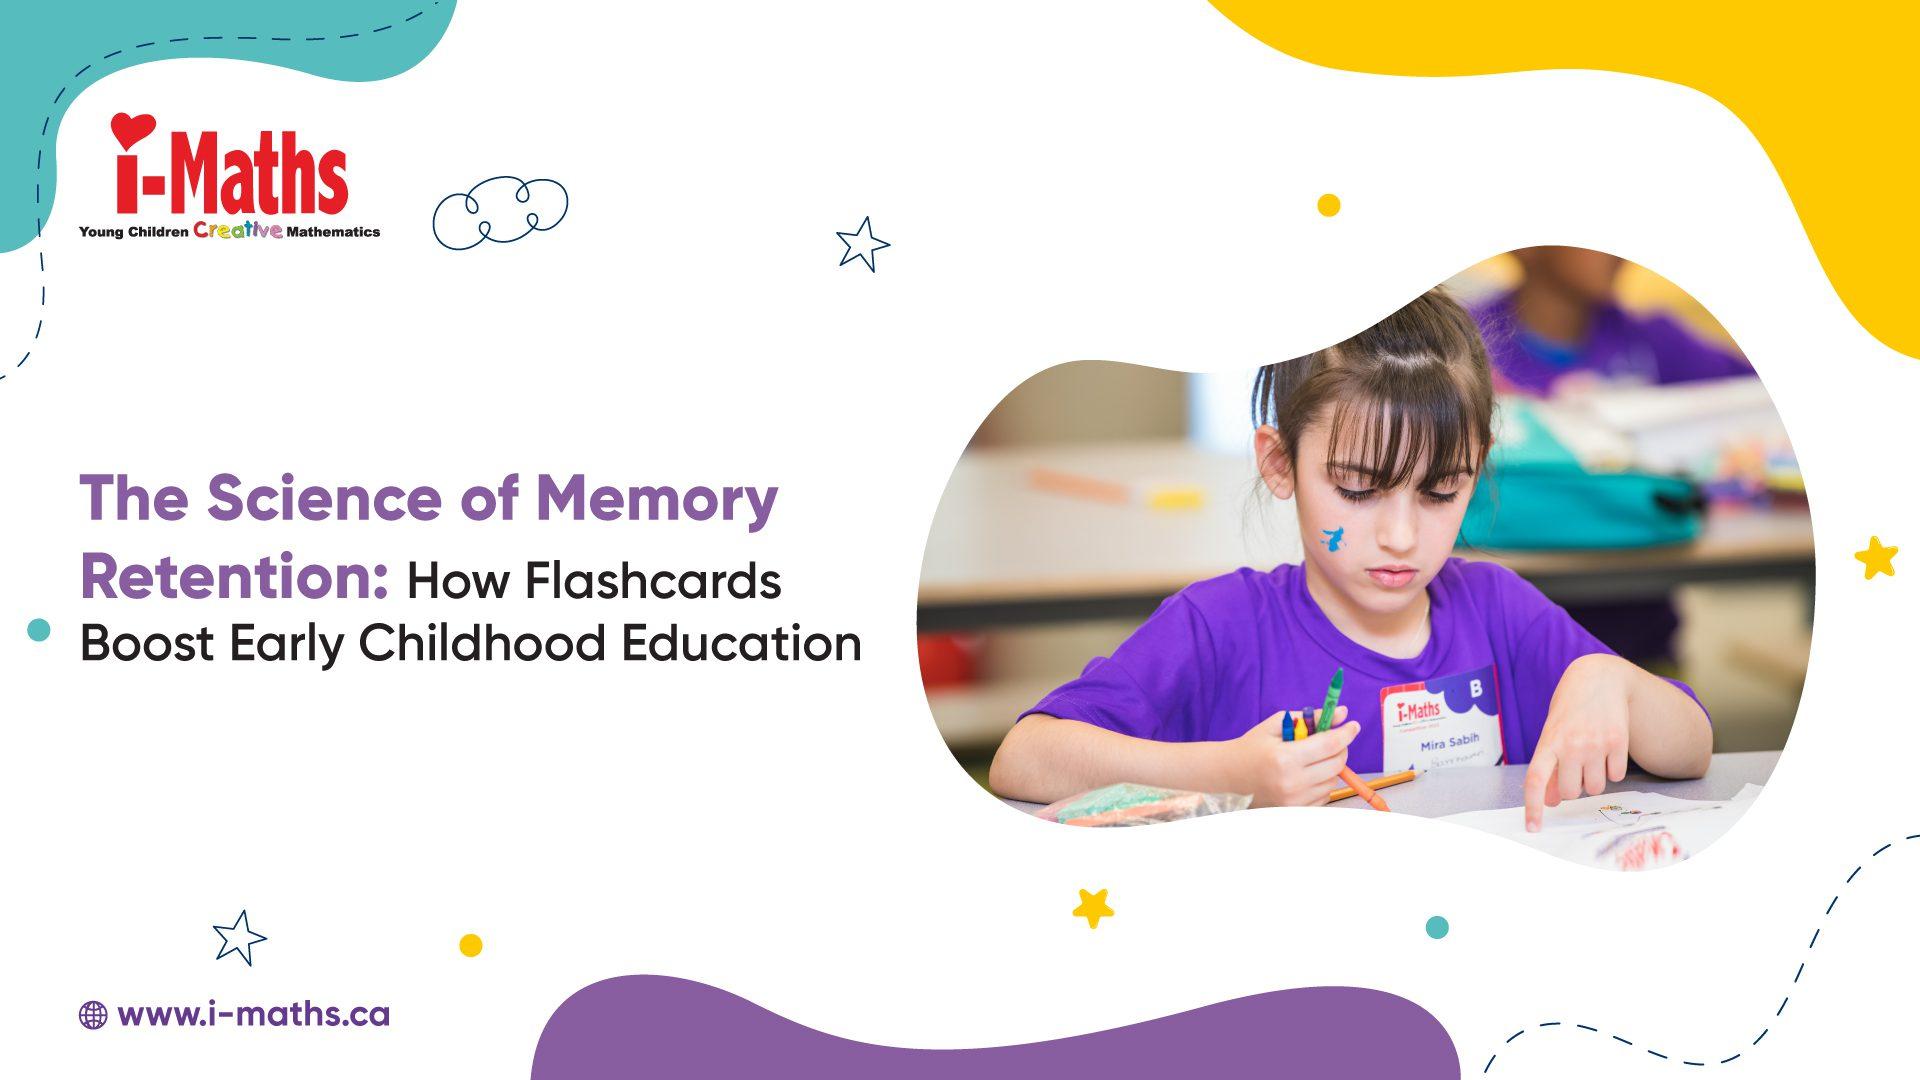 The Benefits of Using Flashcards for Early Childhood Education of Preschoolers